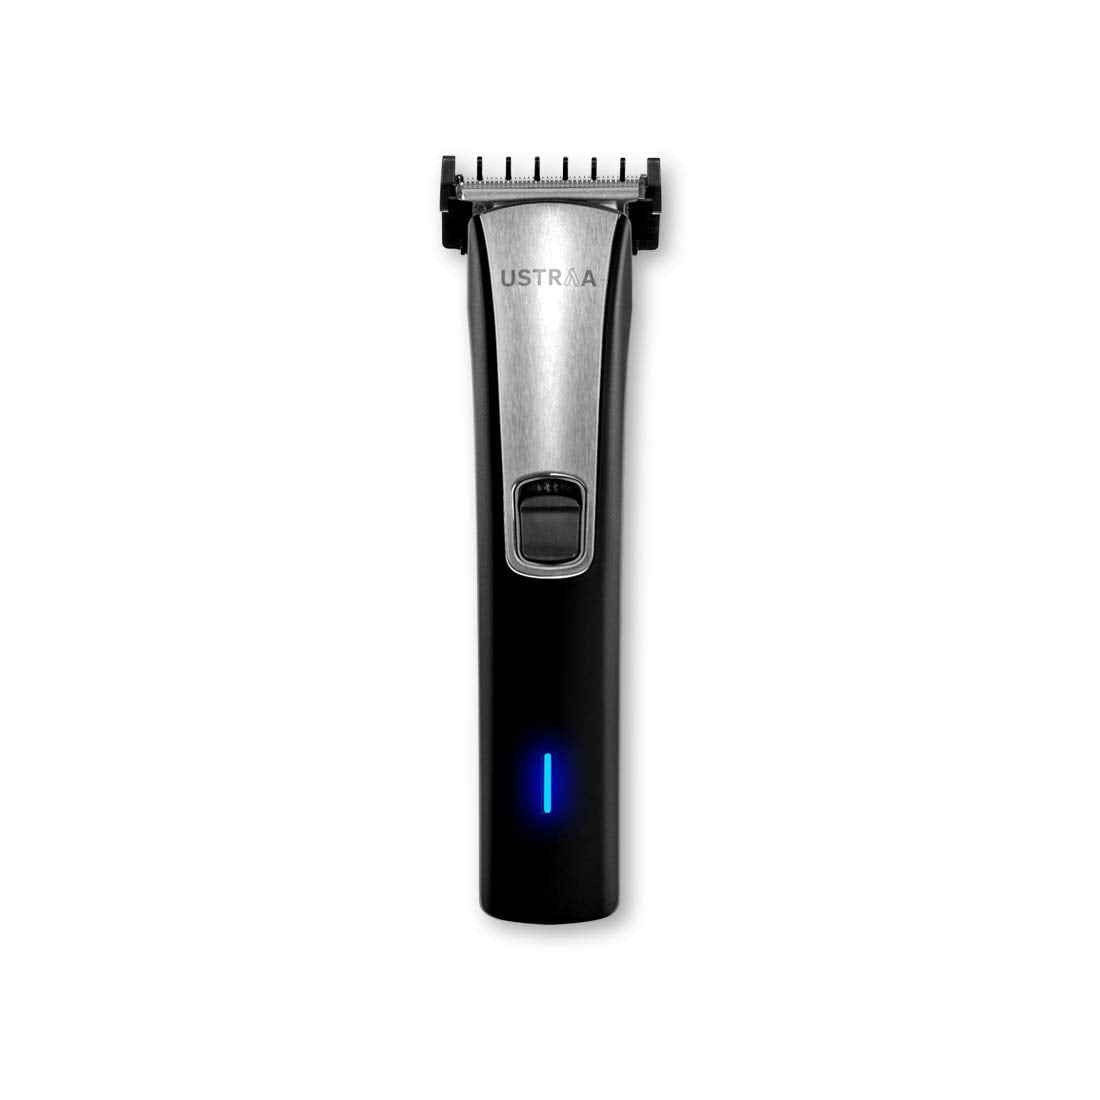 philips trimmer youtube